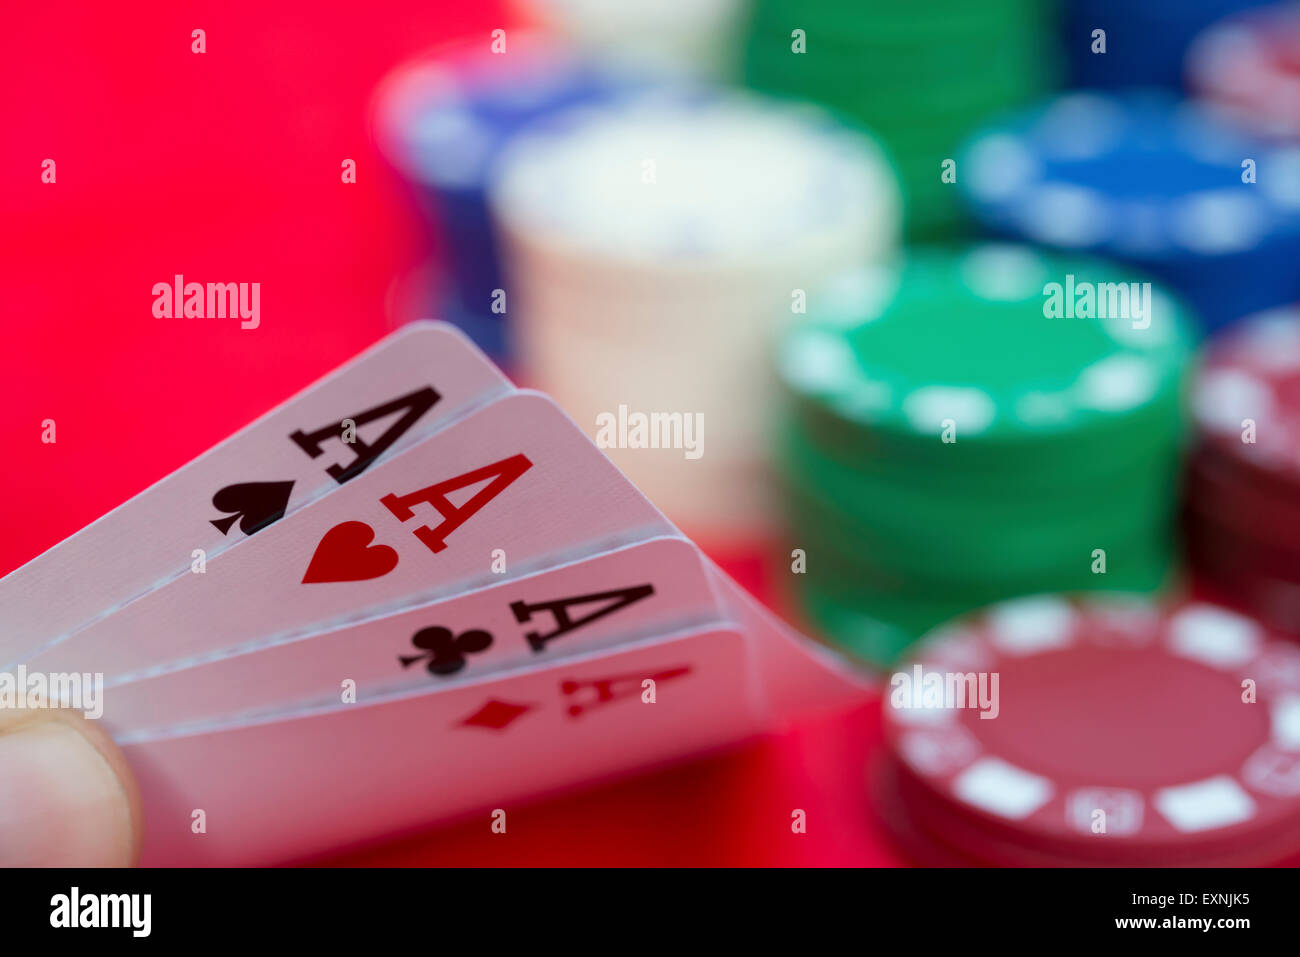 poker player holding 4 Ace of pokers beside lots of chips Stock Photo